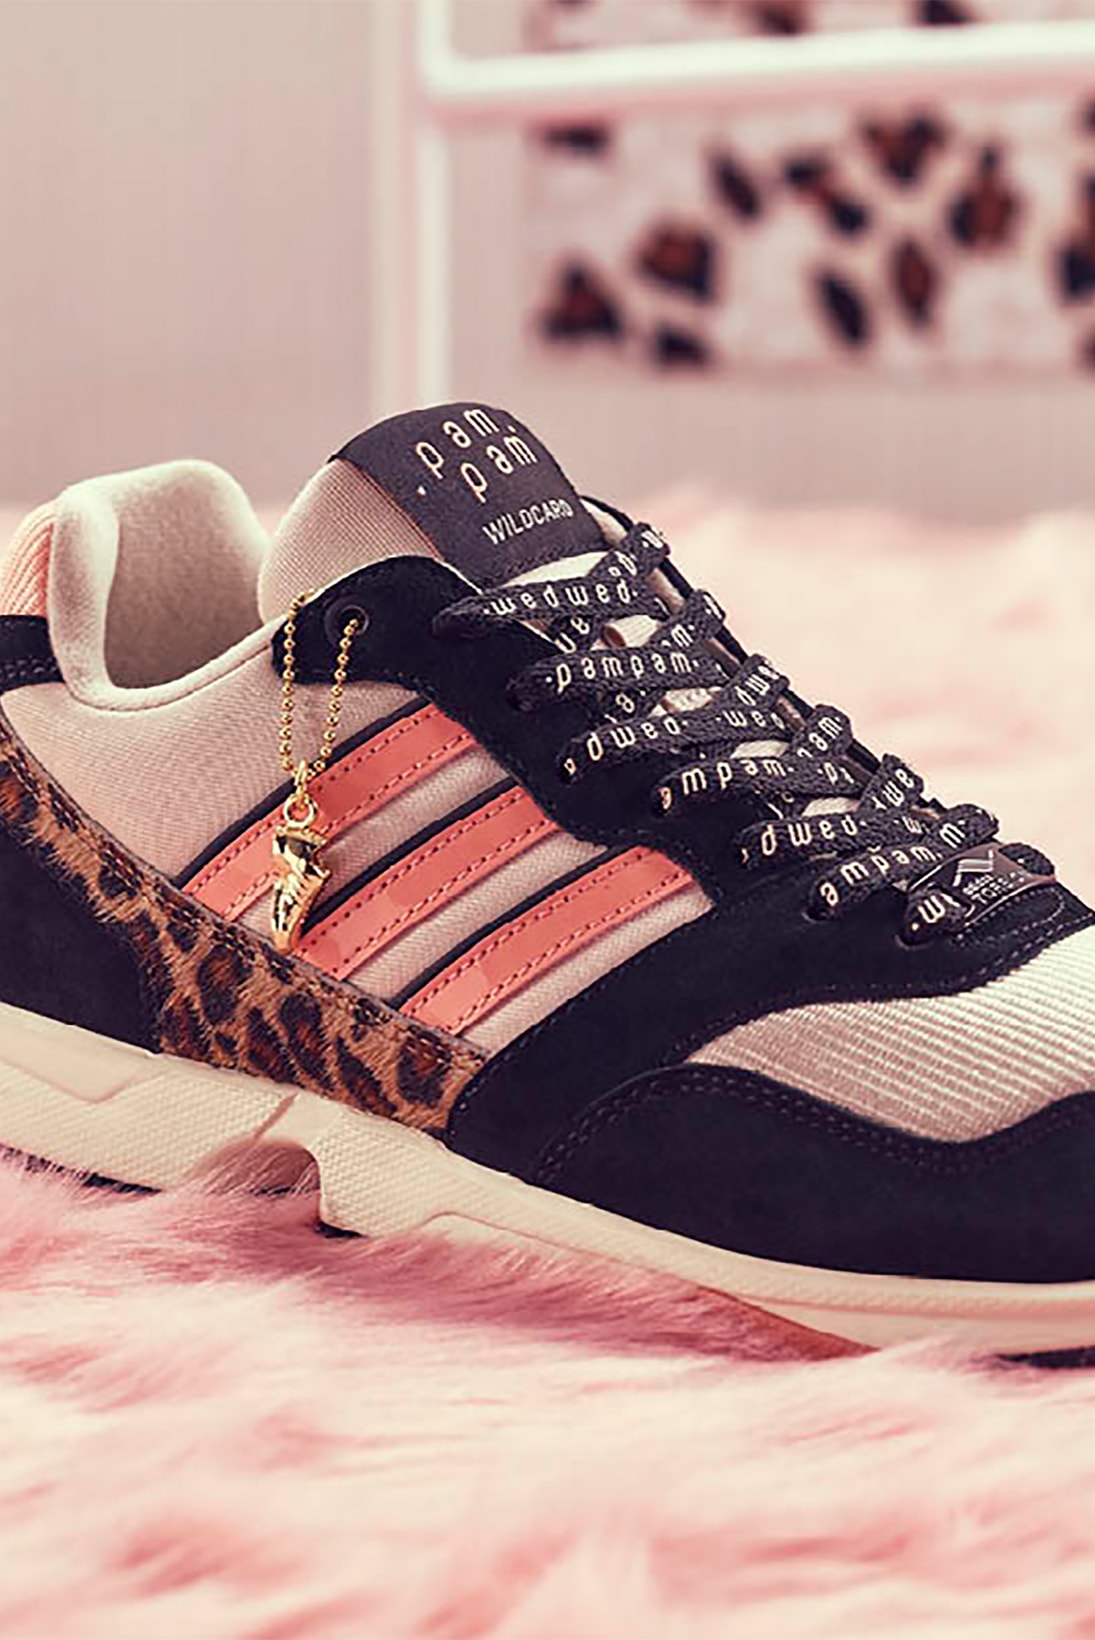 adidas originals pam pam collaboration zx 1000 sneakers pink leopard print black white footwear shoes sneakerhead